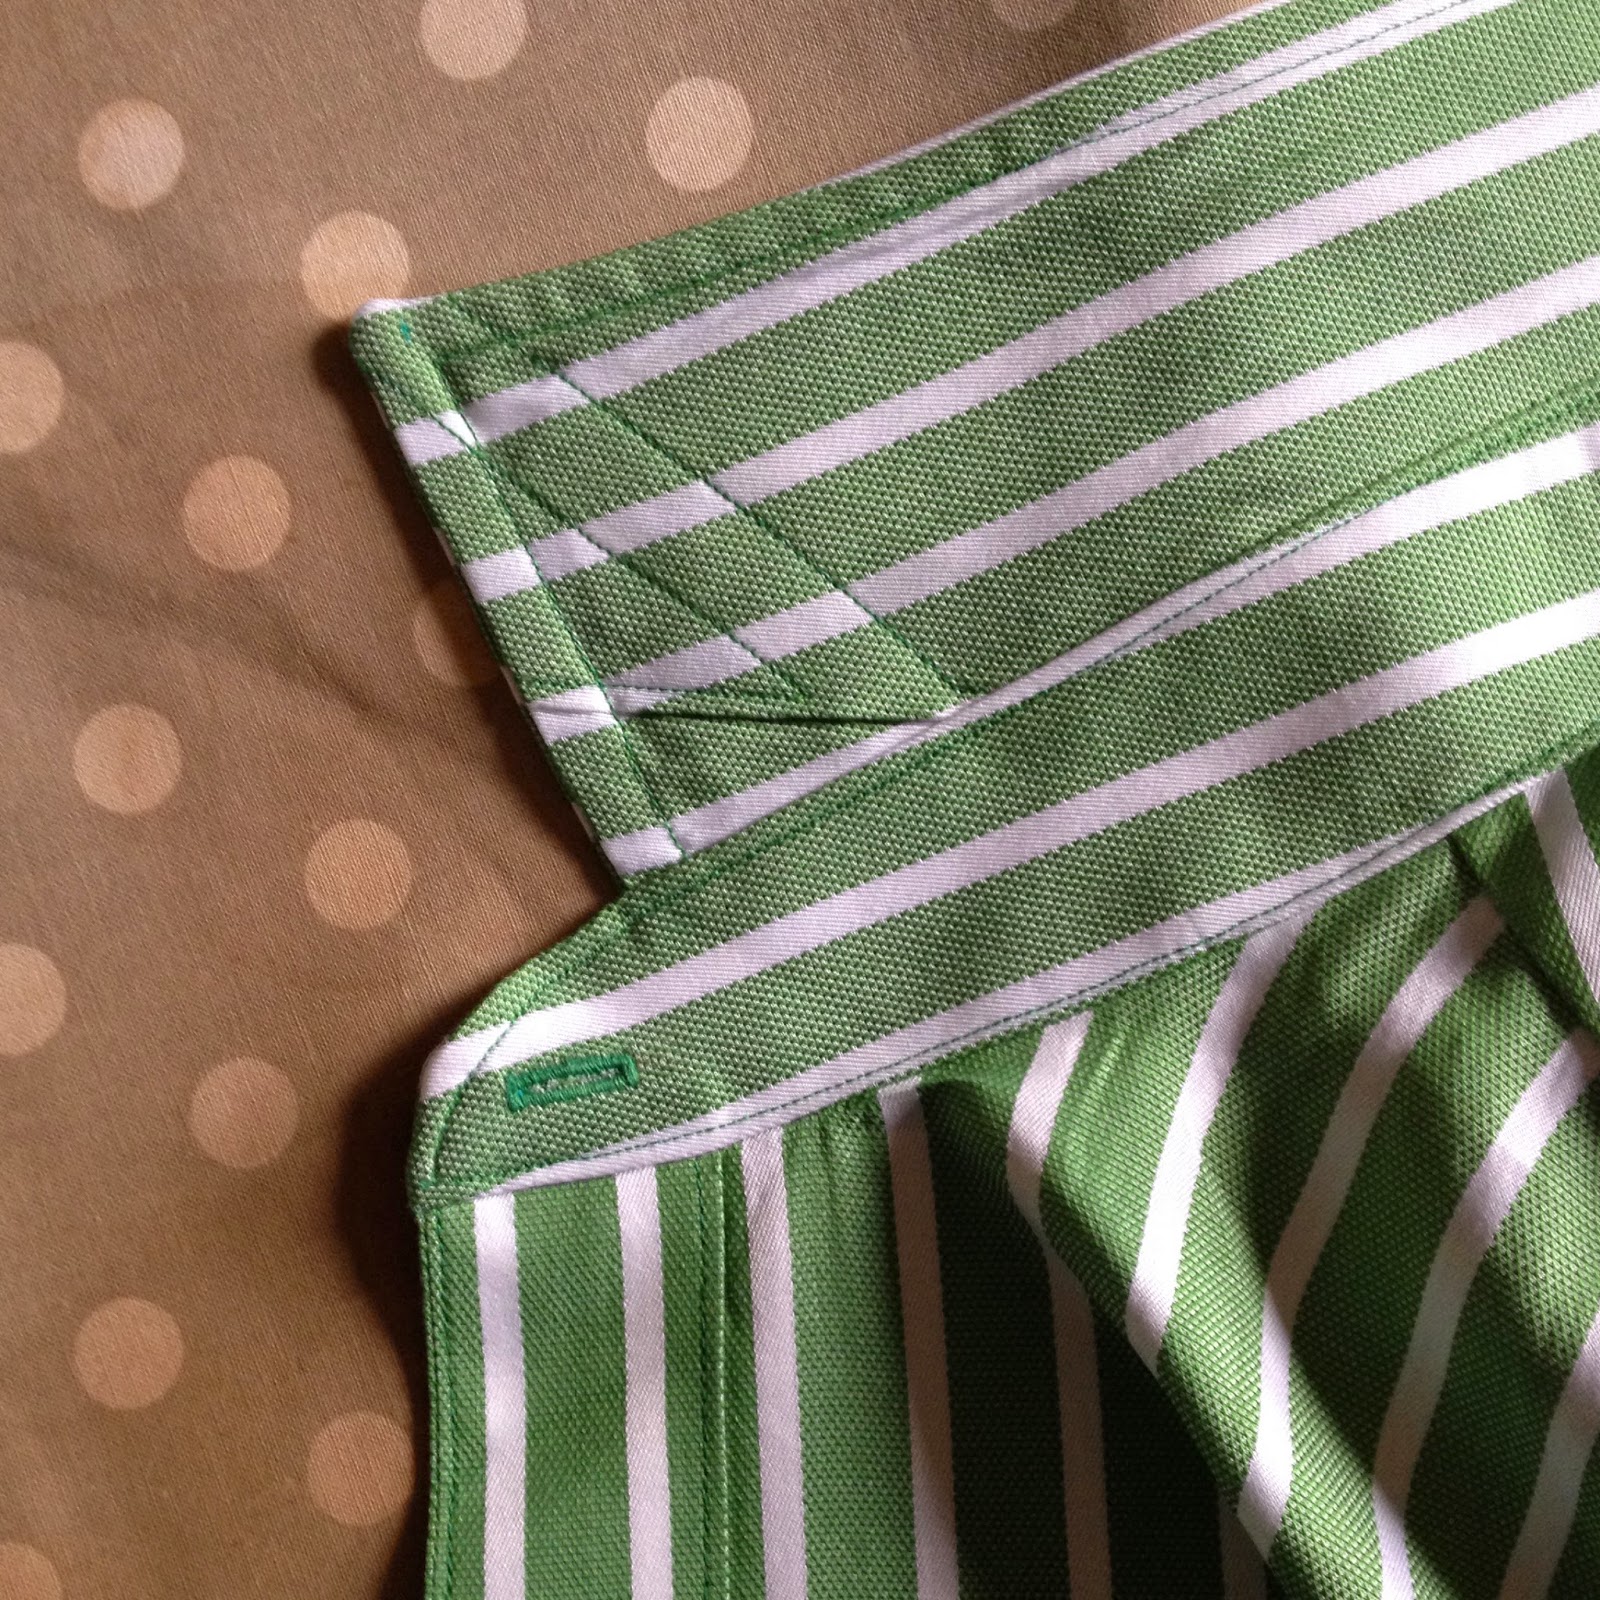 Diary of a Chain Stitcher: How To Add Collar Stay Slots to a Handmade Shirt